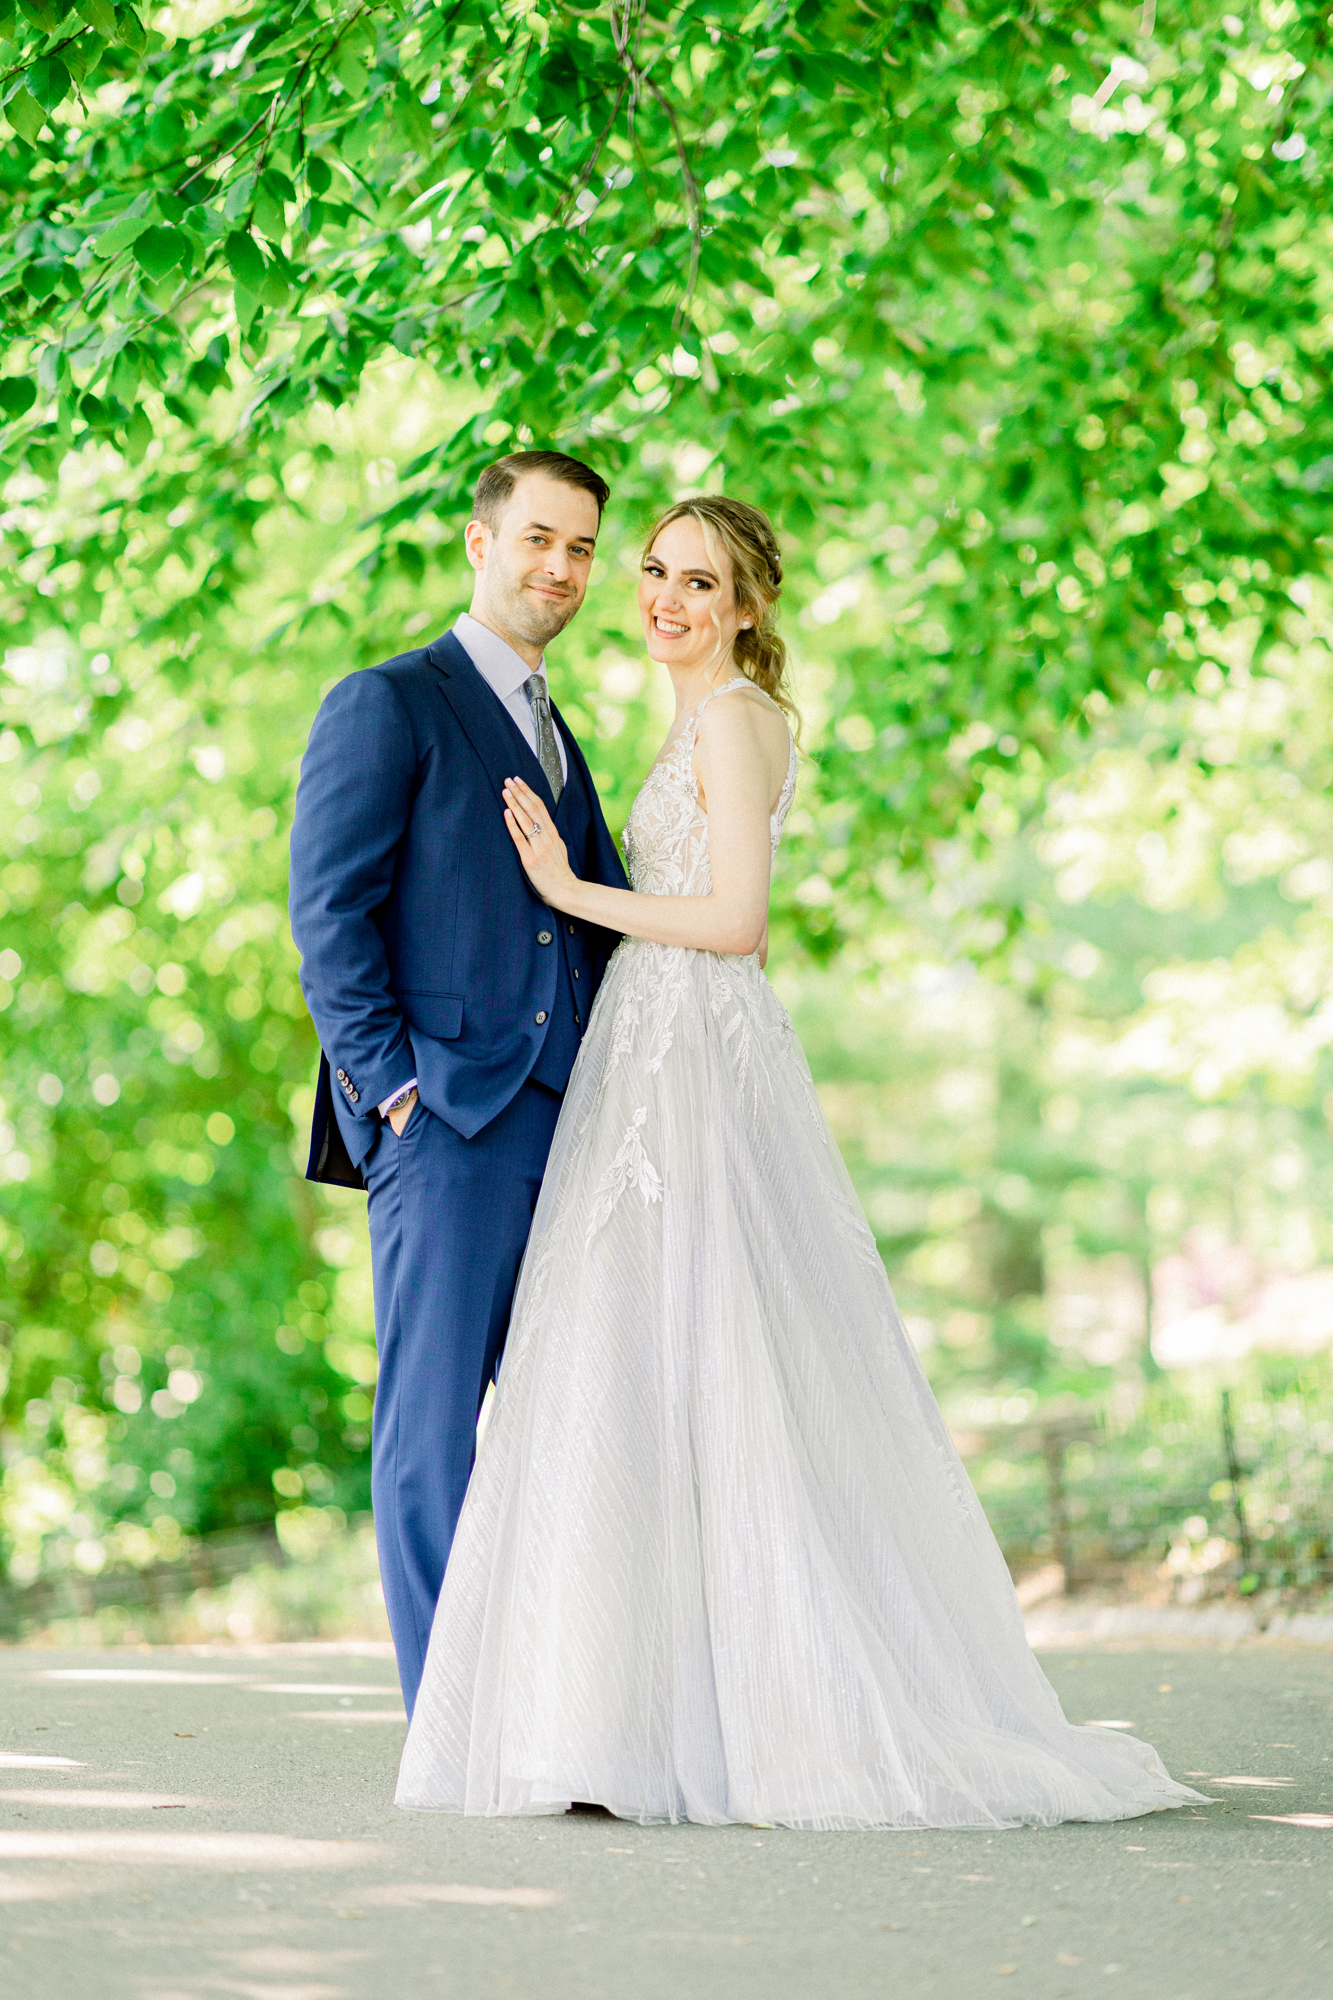 Timeless Elopement Photos in Central Park's Spring Wisteria Pergola